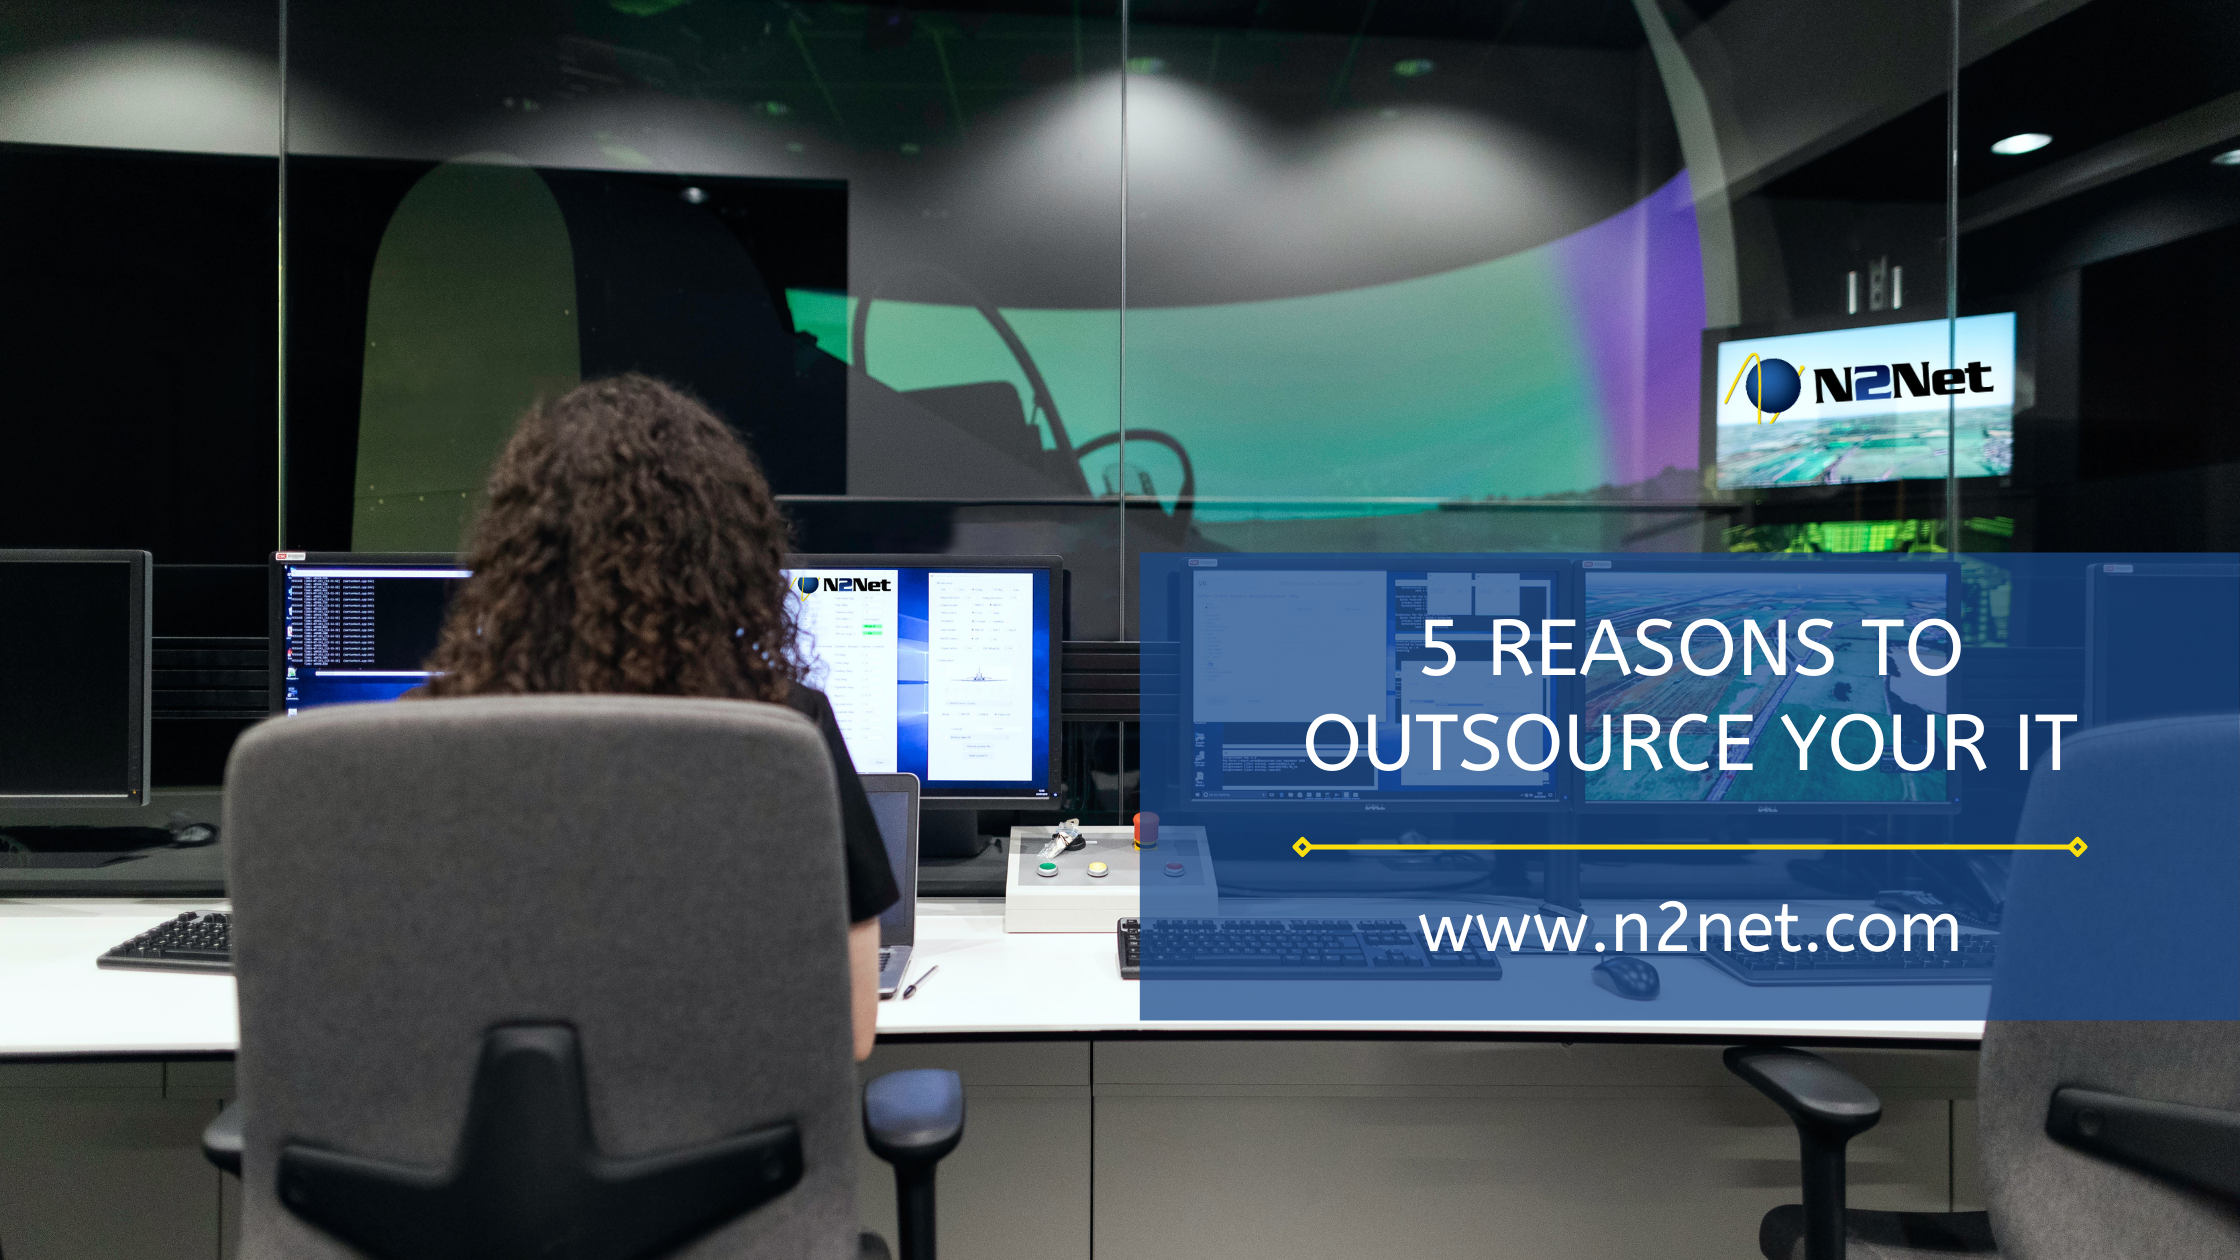 5 Reasons To Outsource Your IT